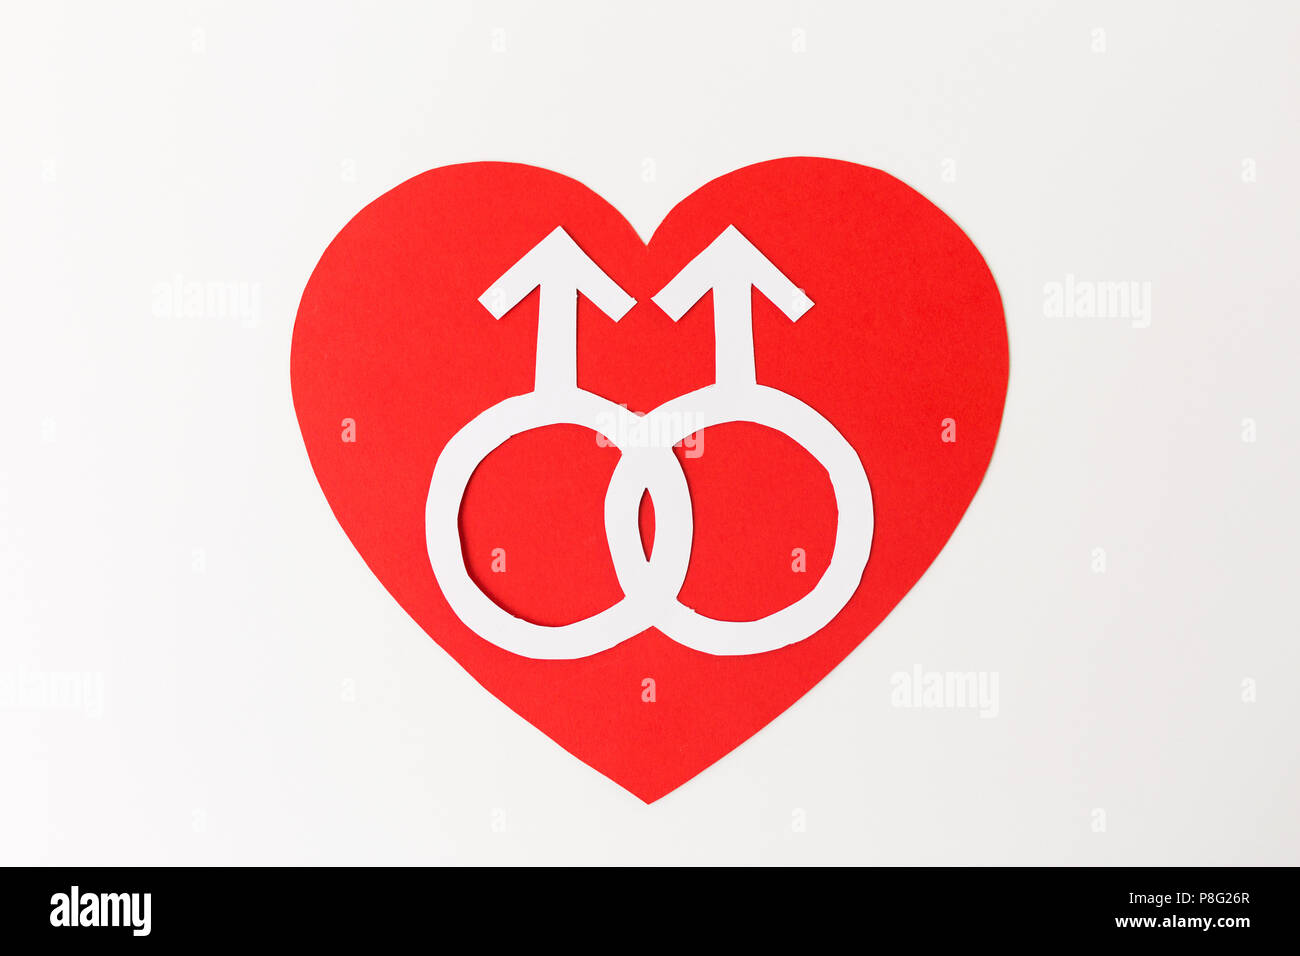 mars symbol on red heart over white background Stock Photo